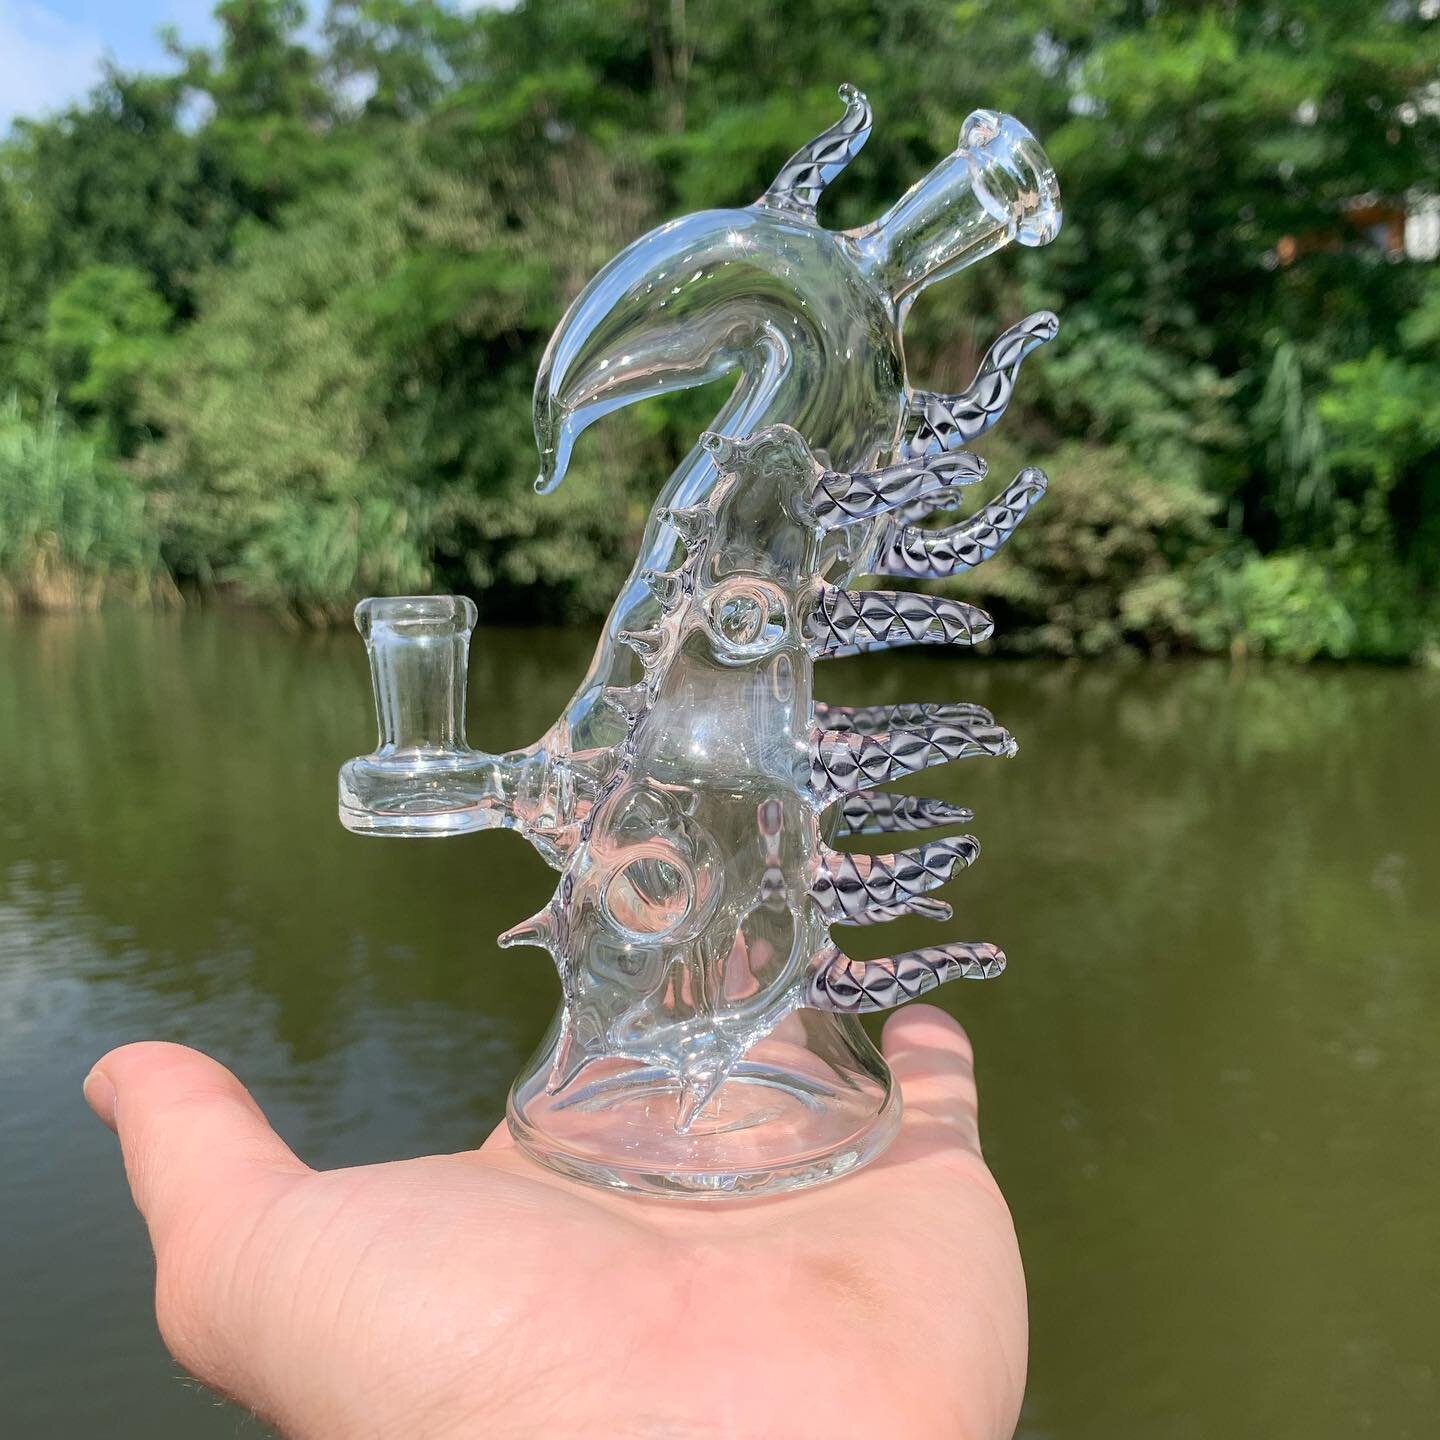 SOLD Playing with the swan shape that I really like and ribbon canes on the wings.

Swipe for the video and details.

High 15 cm
10 mm joint
2 holes percolator

#&rsquo;22/28

__________________________________________________

#hashba_glass #headygl